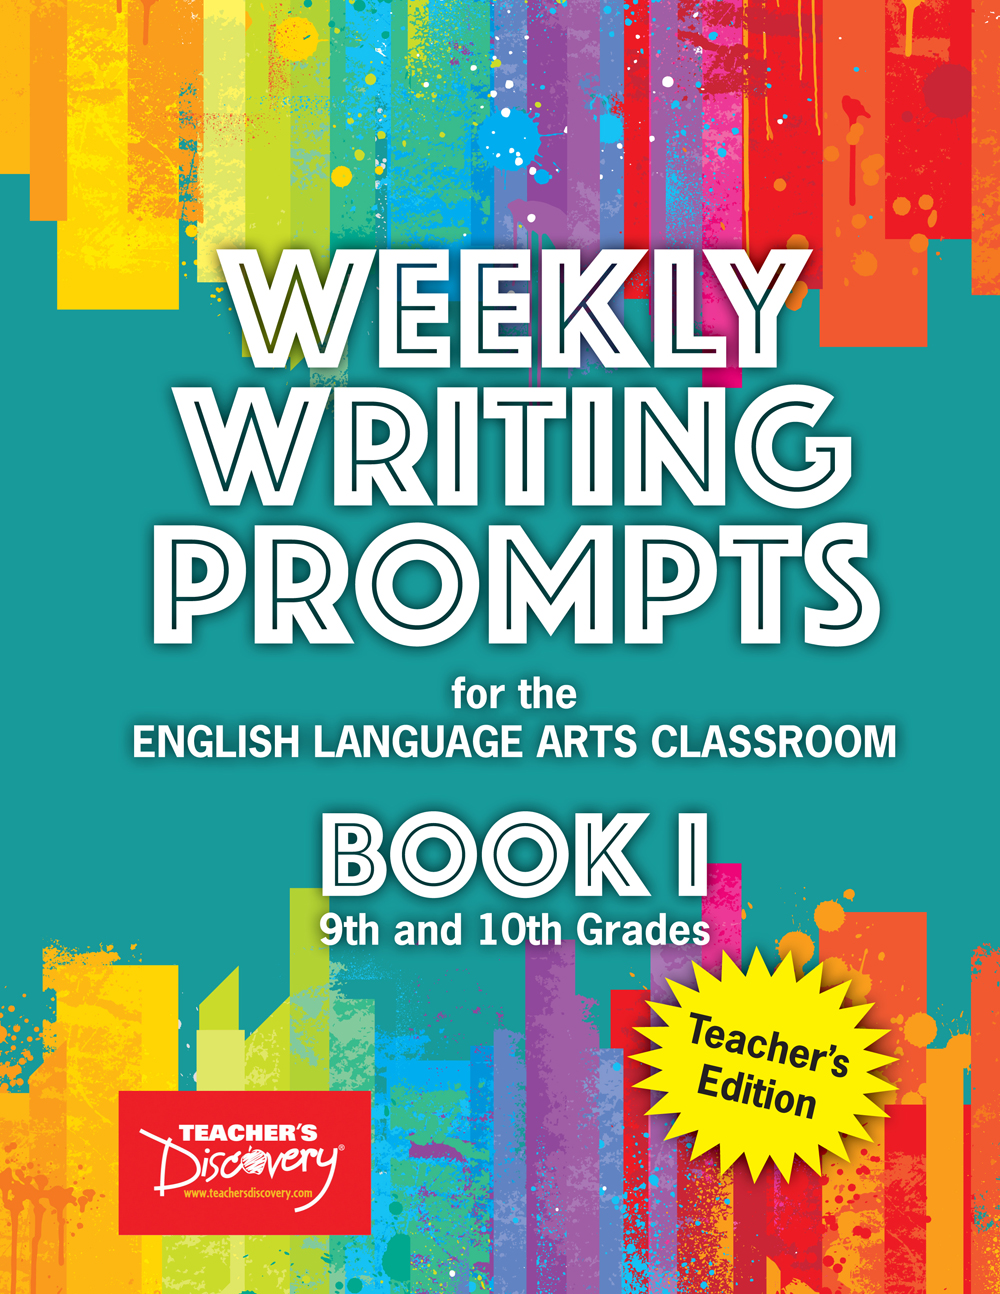 Weekly Writing Prompts for the English Language Arts Classroom Book I 